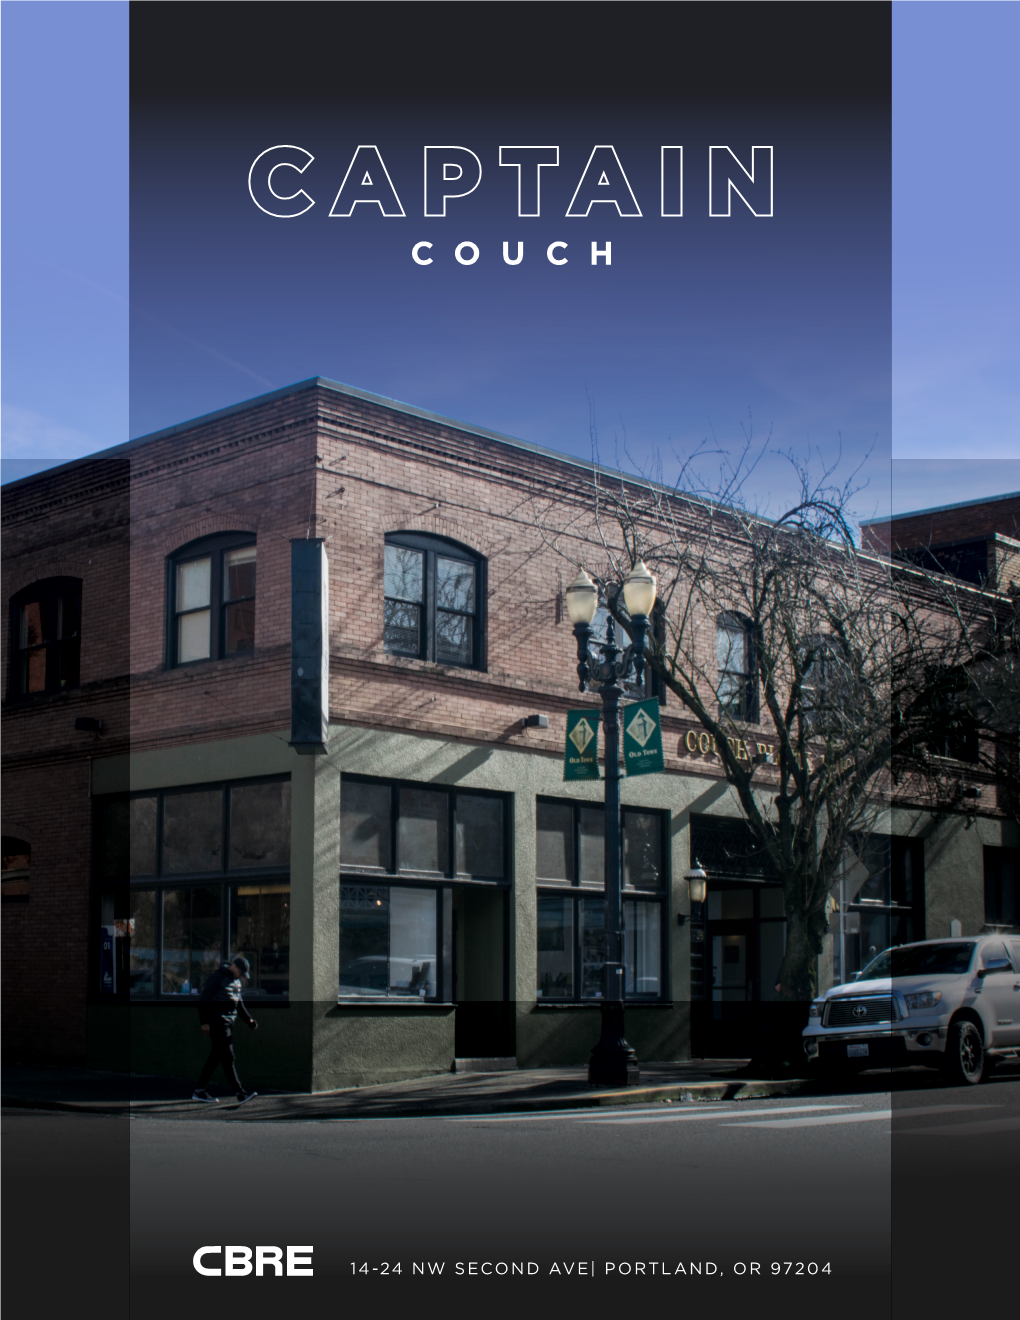 14-24 Nw Second Ave| Portland, Or 97204 Historic Old Town Appeal